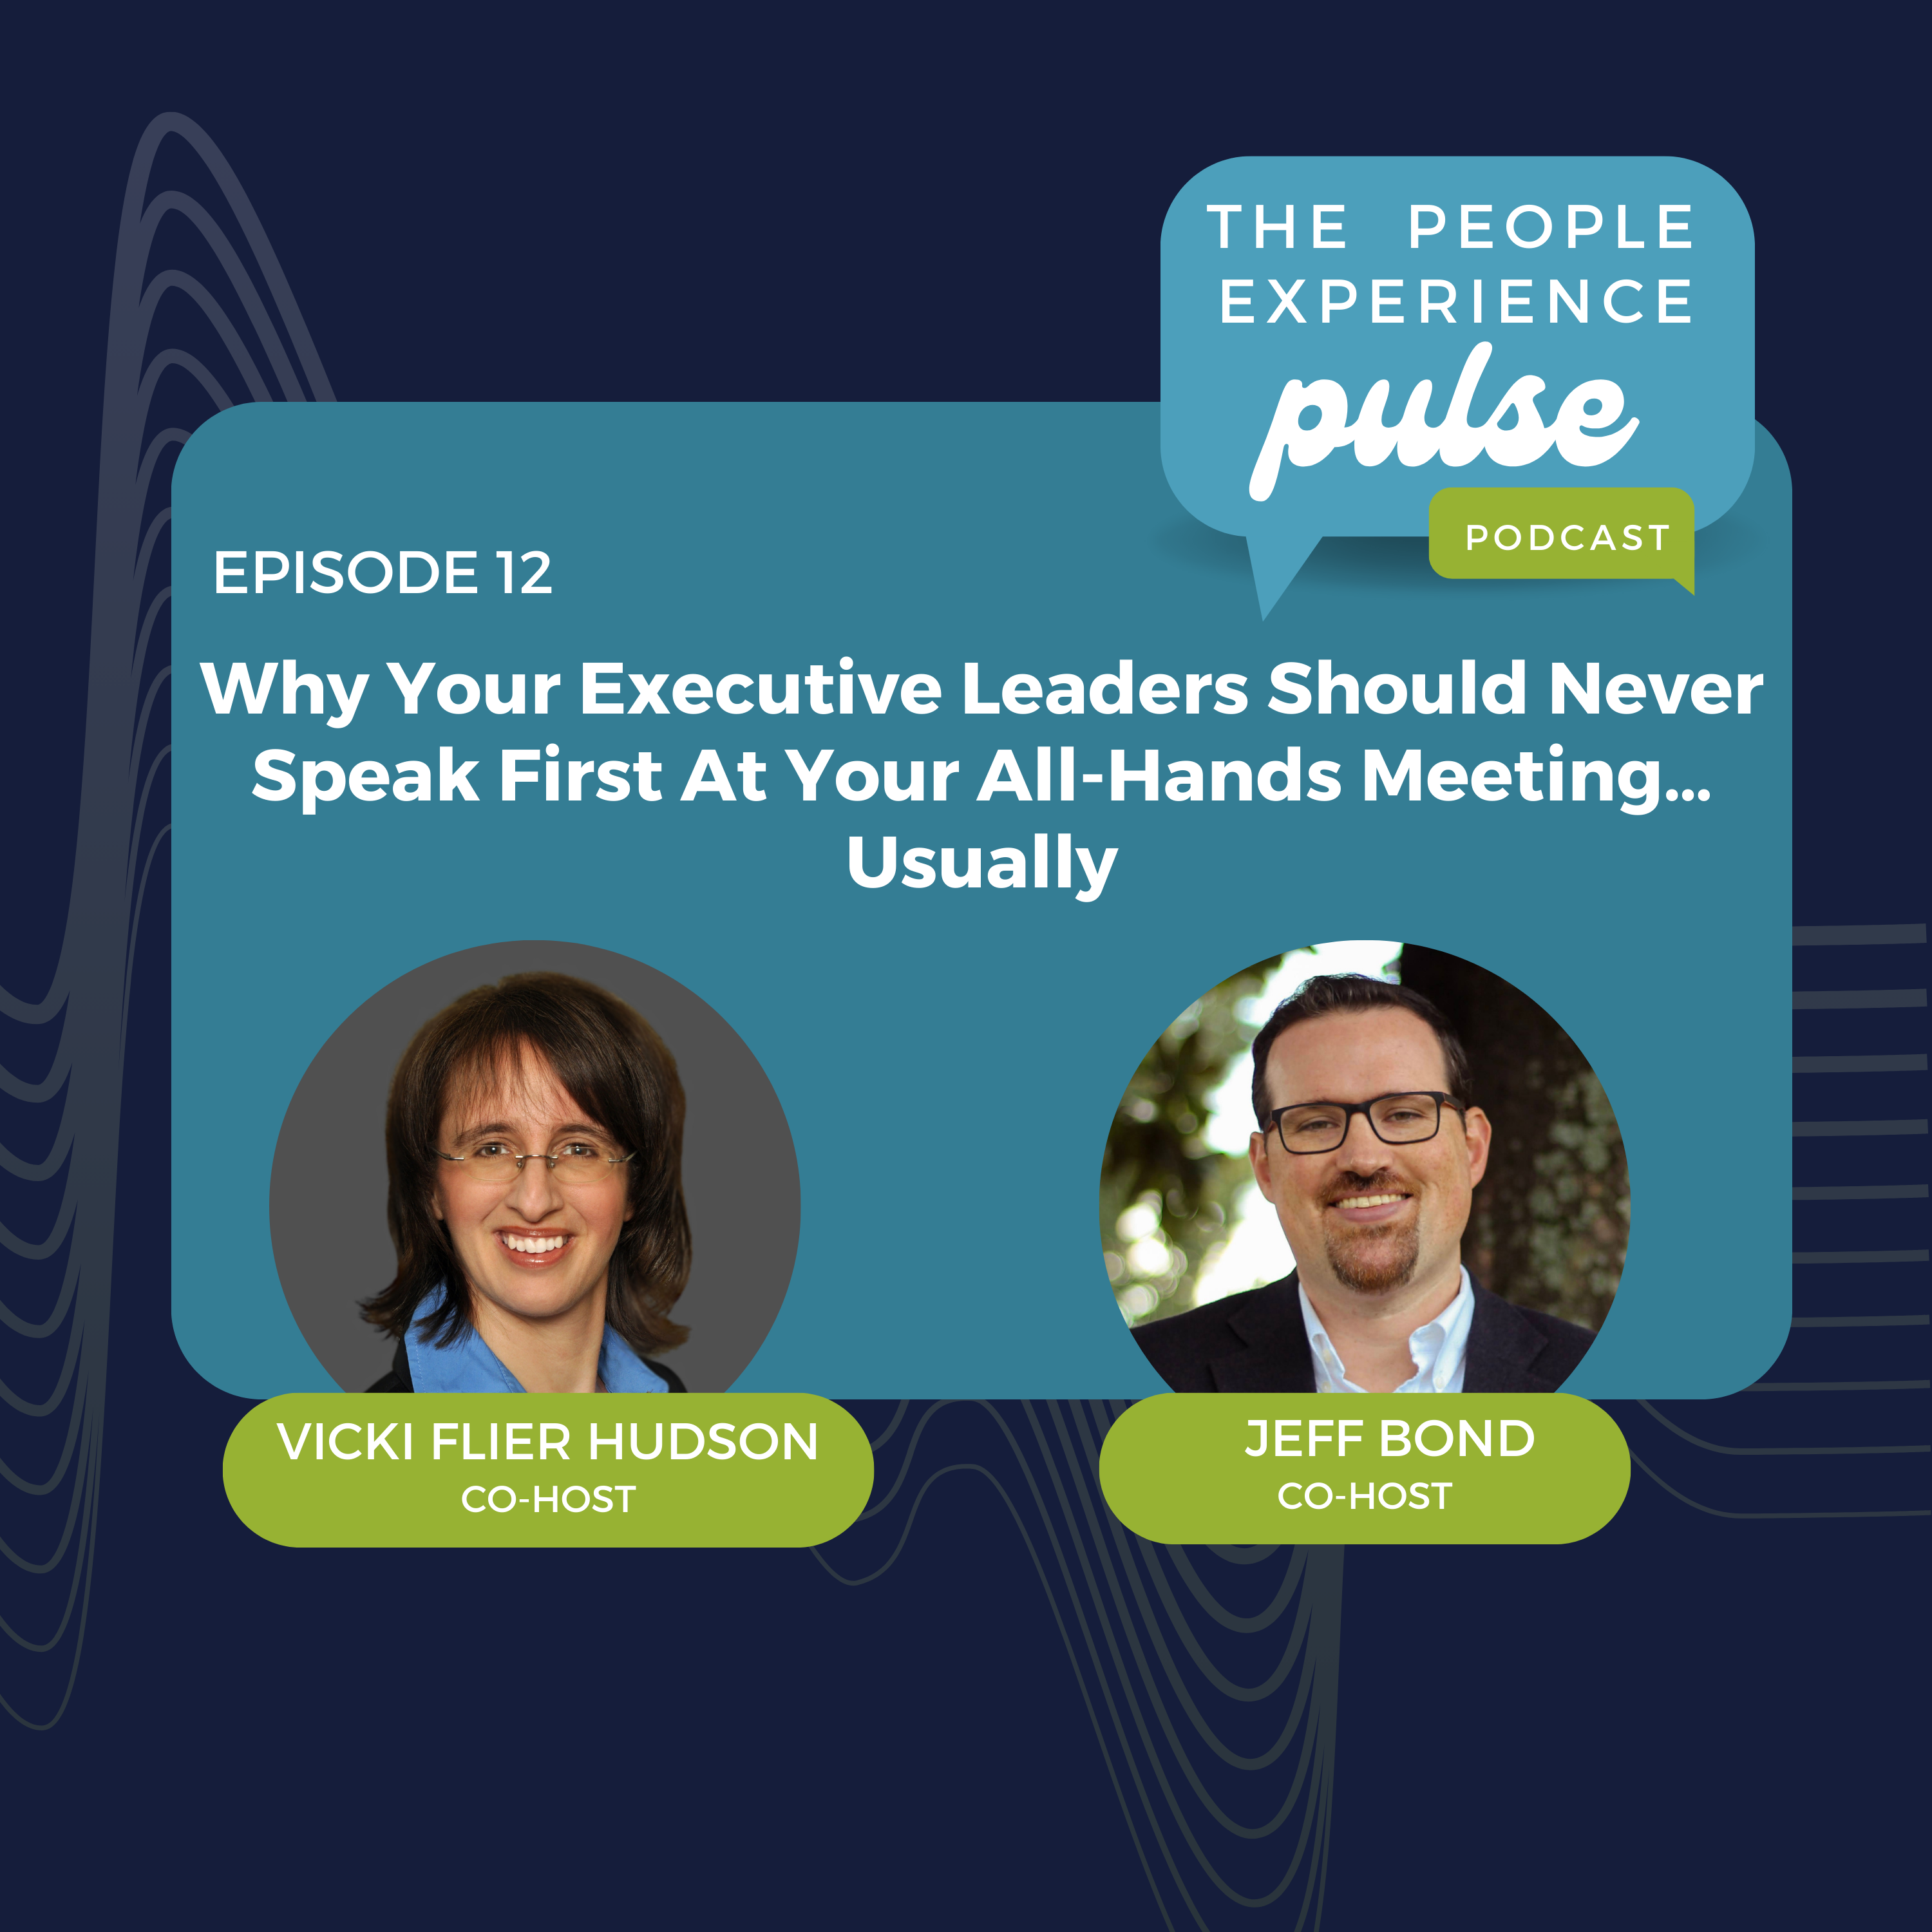 Why Your Executive Leaders Should Never Speak First At Your All-Hands Meeting…Usually